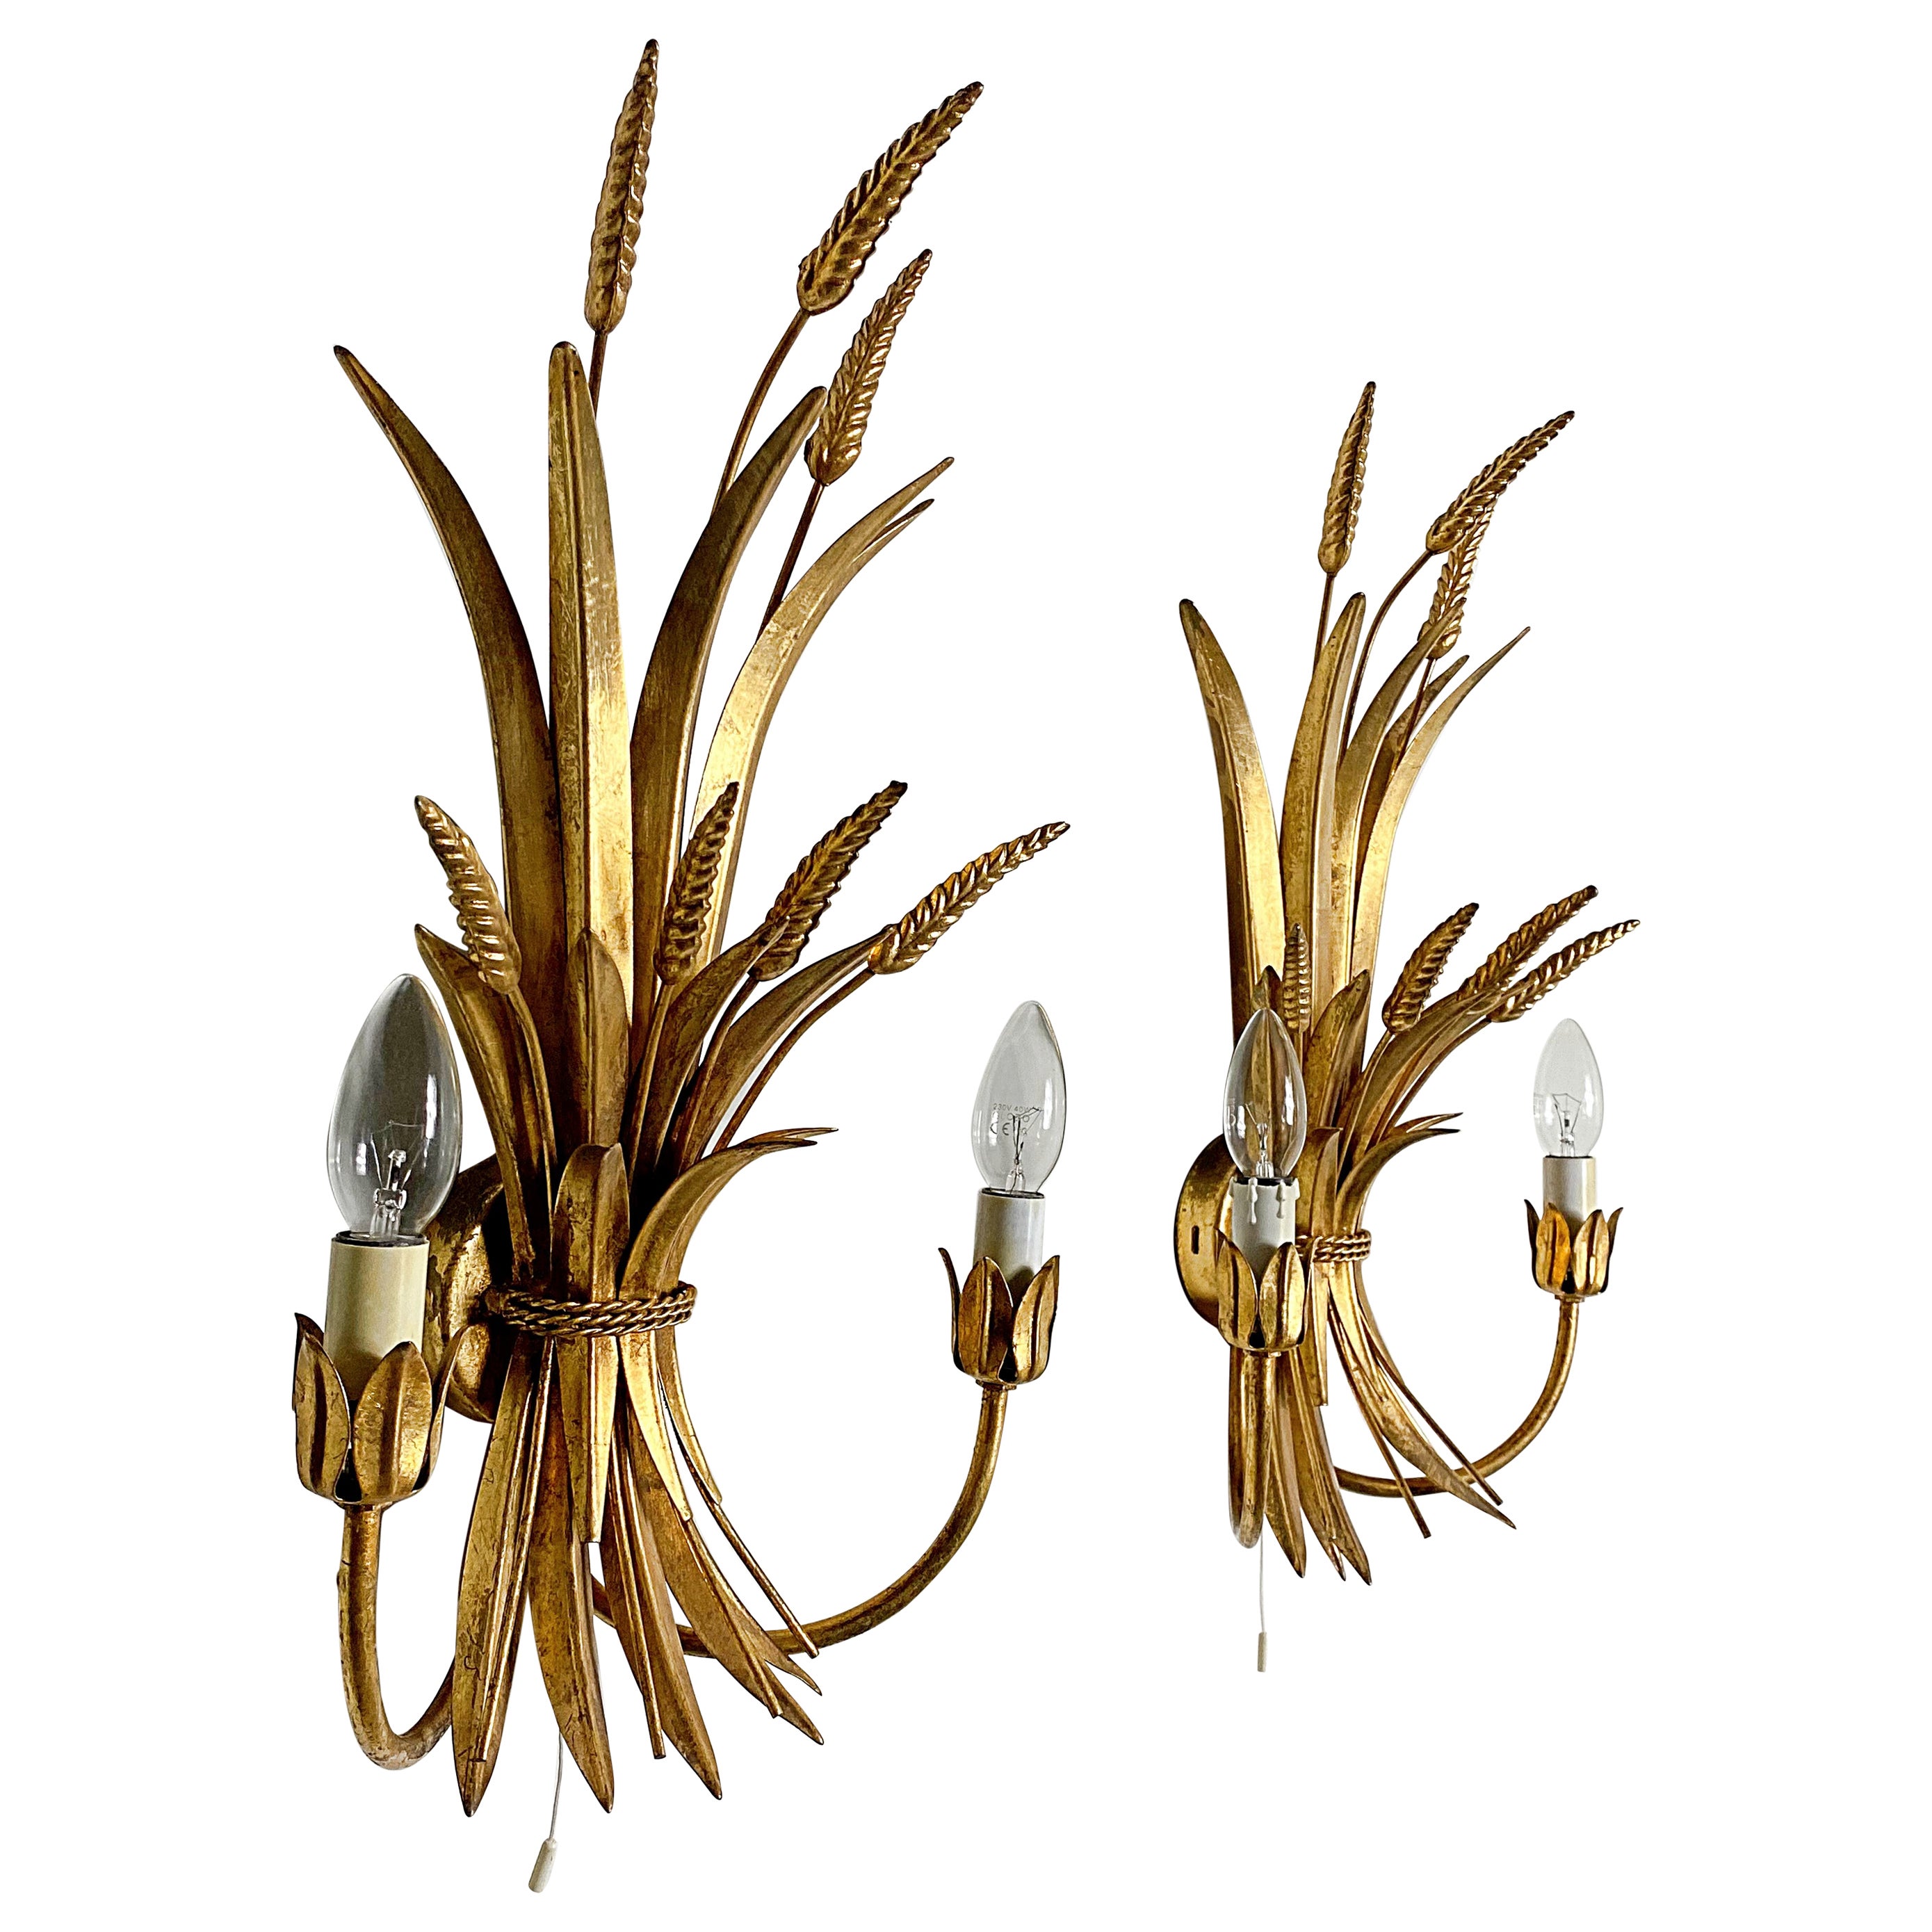 HANS KÖGL Pair Gilded Wheat Hollywood Regency Sconce Wall Lights, 1970s, Germany For Sale